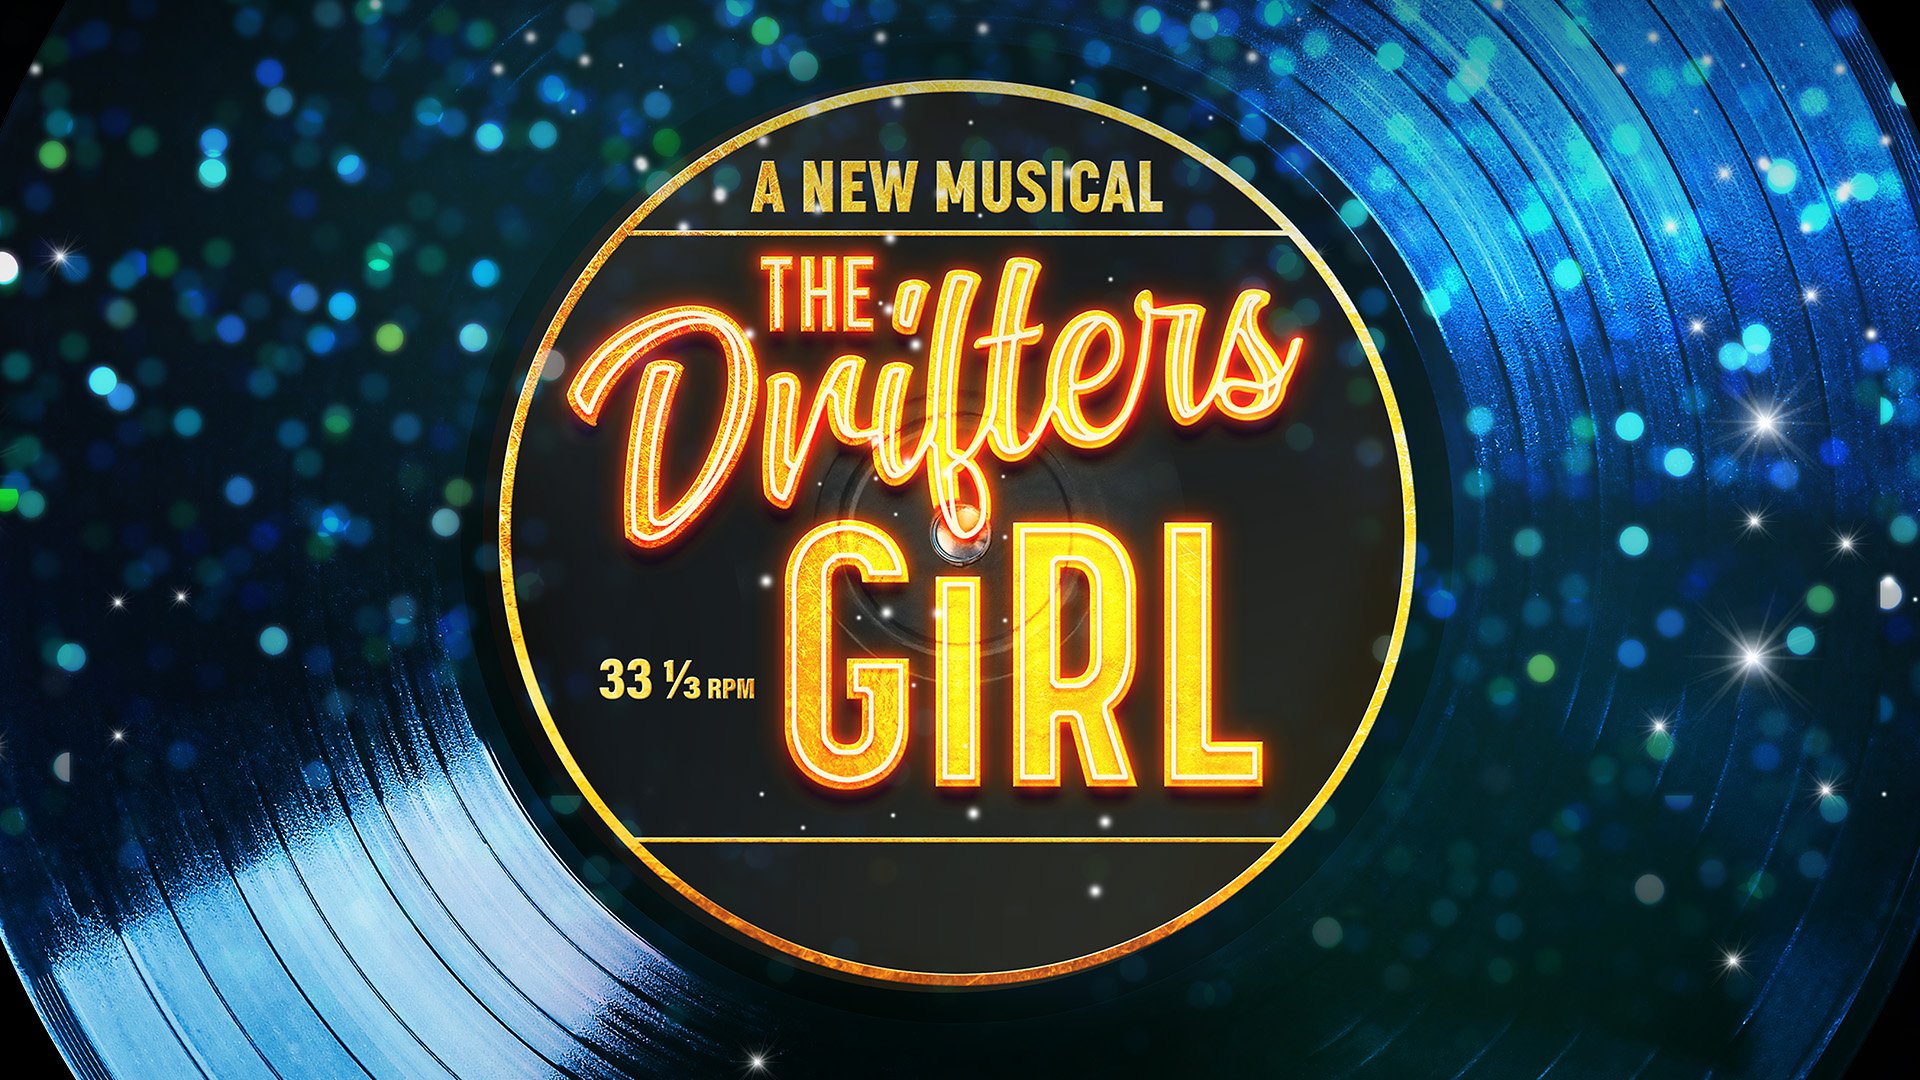 The Drifters Girl Top Image